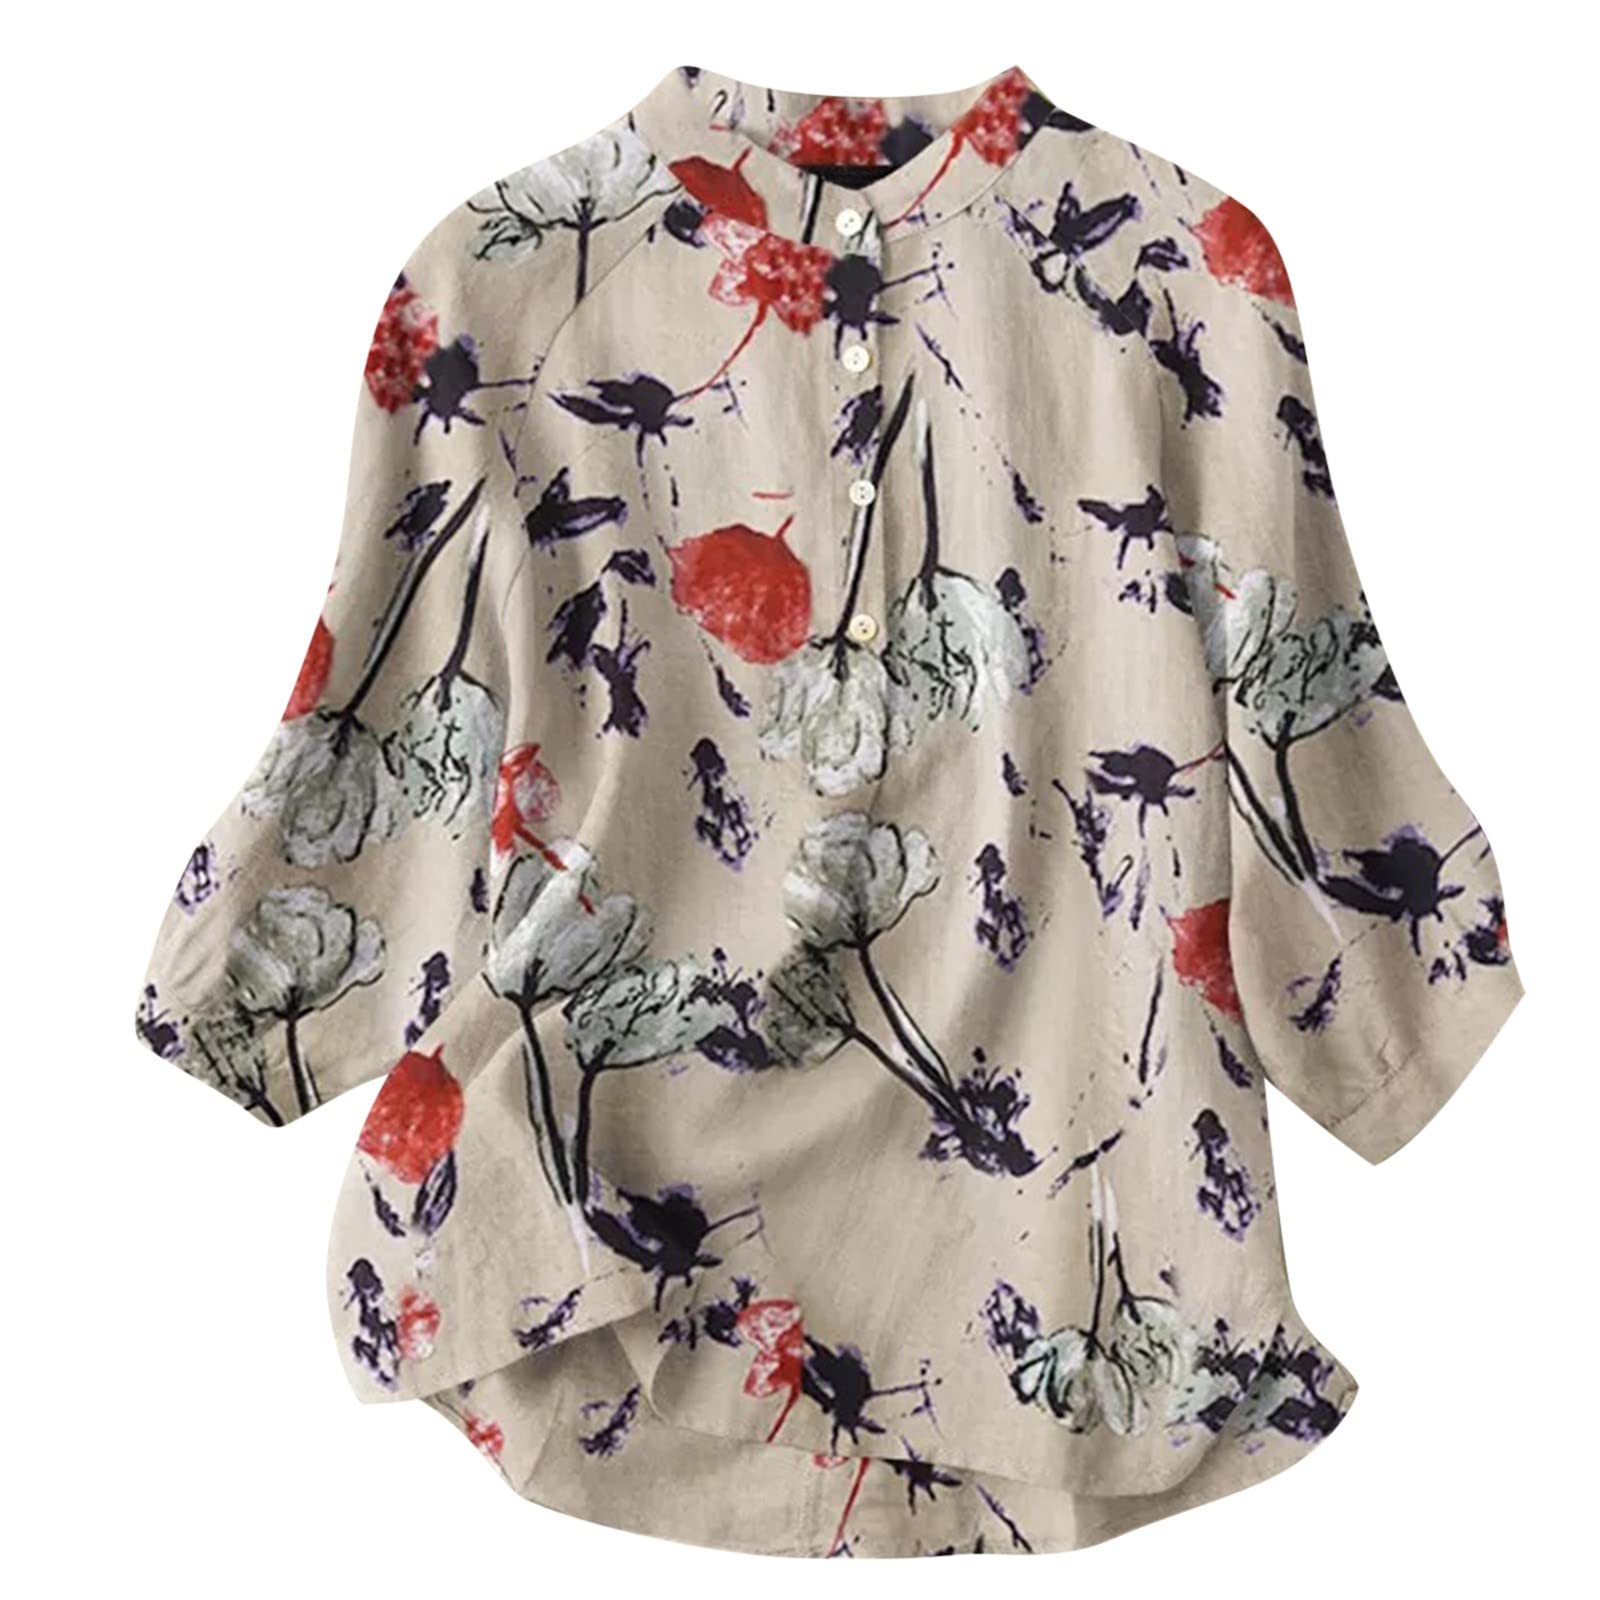 Long Sleeve Shirts for Women Fashion Floral Printed Loose Casual Stand Collar Button Down Blouse Ladies Plus Size Tops